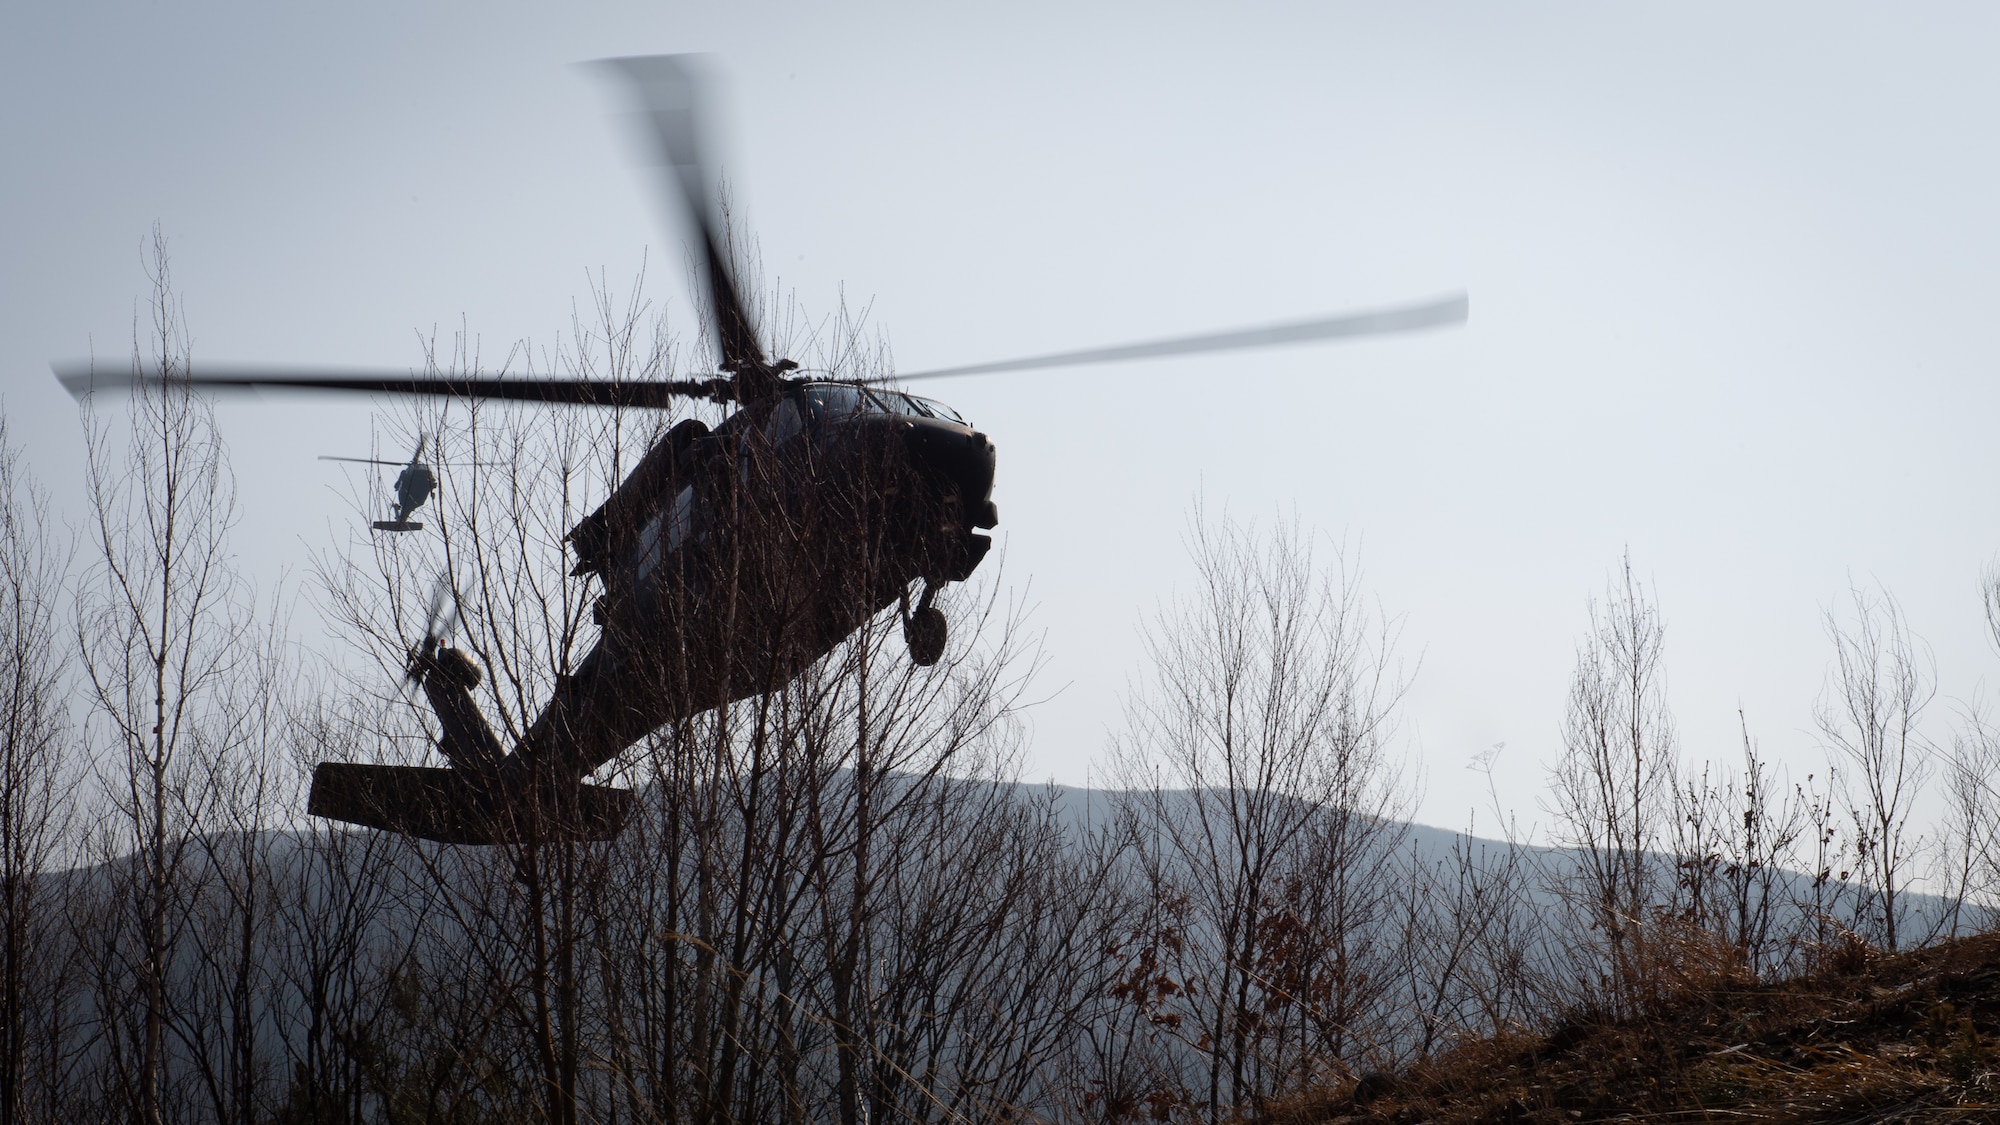 Two UH-60 Blackhawks land at Pilsung Range for joint terminal attack controller training with Airmen from the 604th Air Support Operations Squadron and 607th Air Support Operations Group in Gangwan Province, Republic of Korea, Feb. 14, 2019.